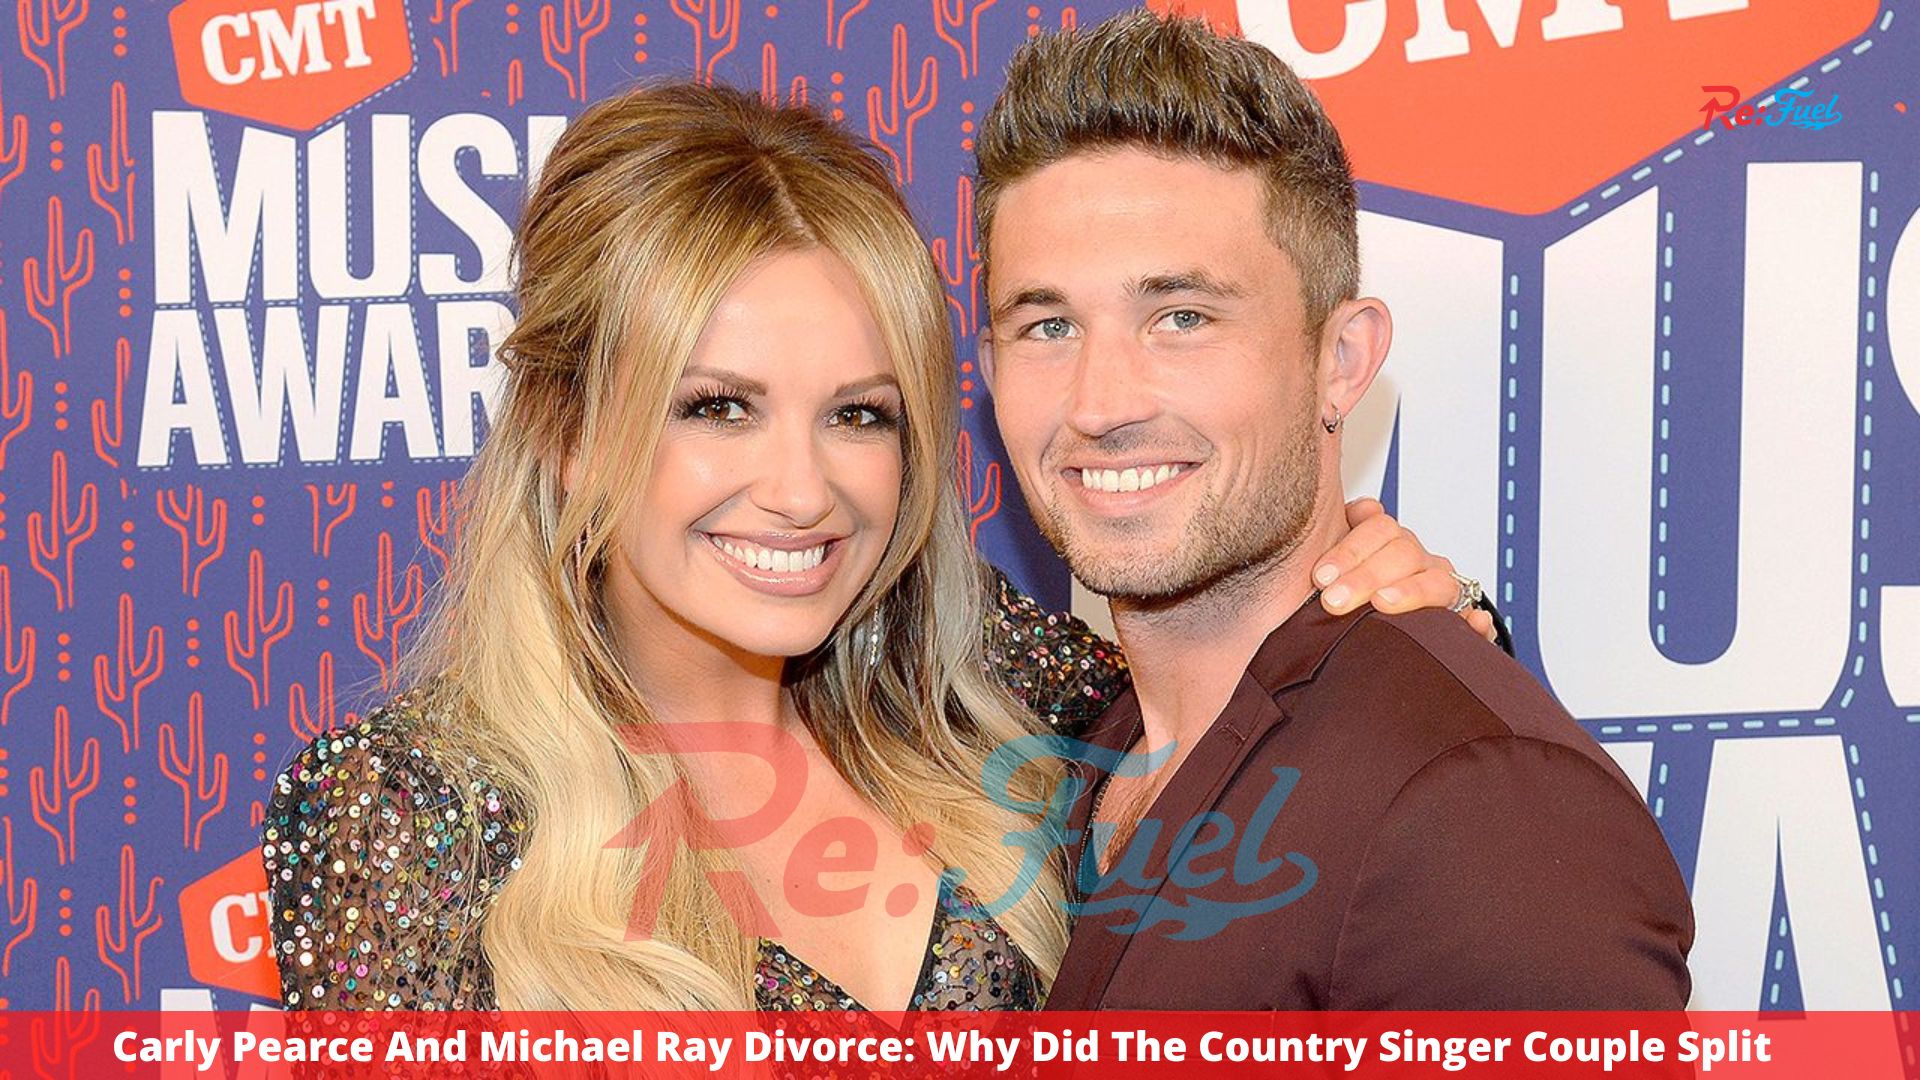 Carly Pearce And Michael Ray Divorce: Why Did The Country Singer Couple Split